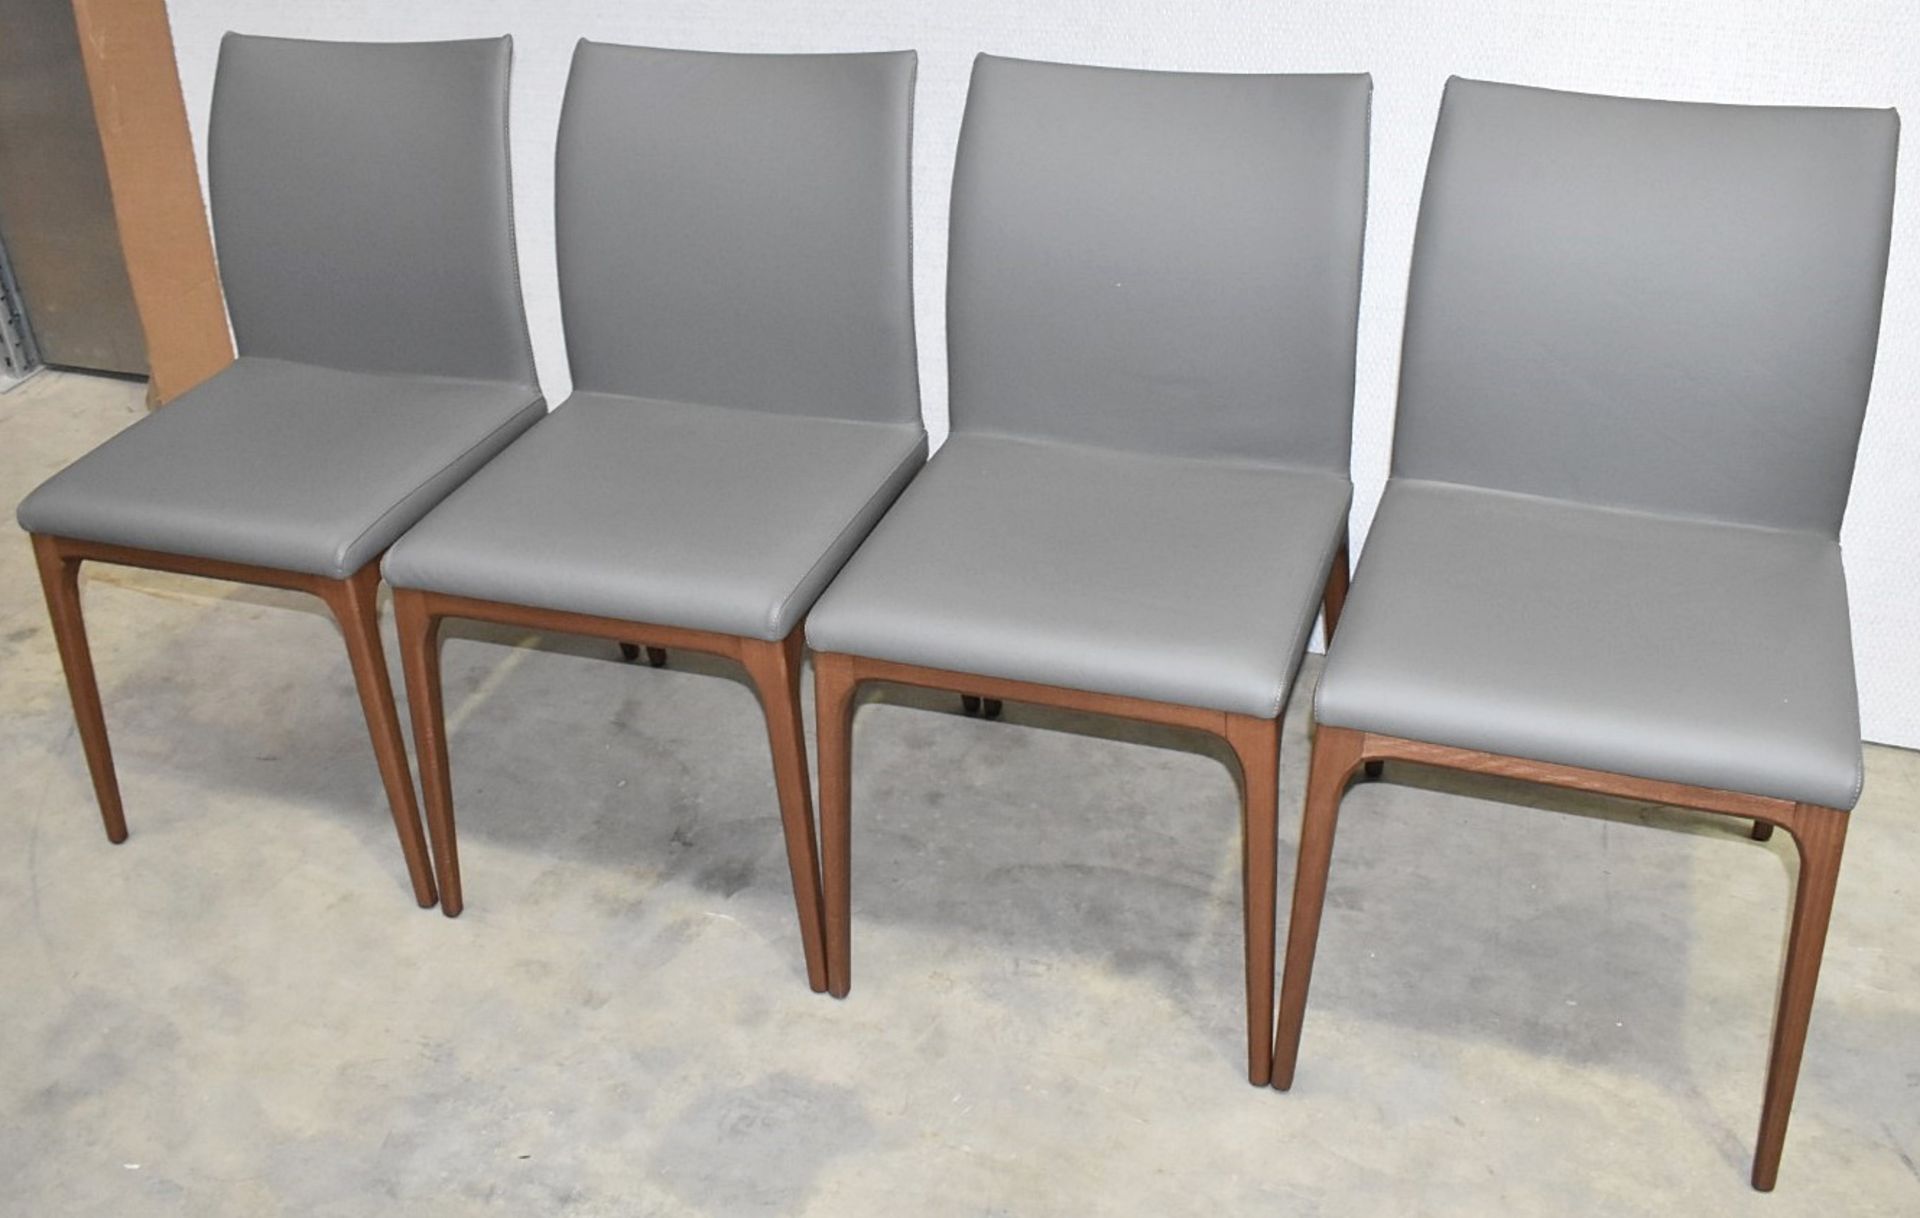 4 x CATTELAN ITALIA 'Arcadia Couture' Leather Upholstered Dining Chairs - Total Original RRP £3,540 - Image 4 of 19